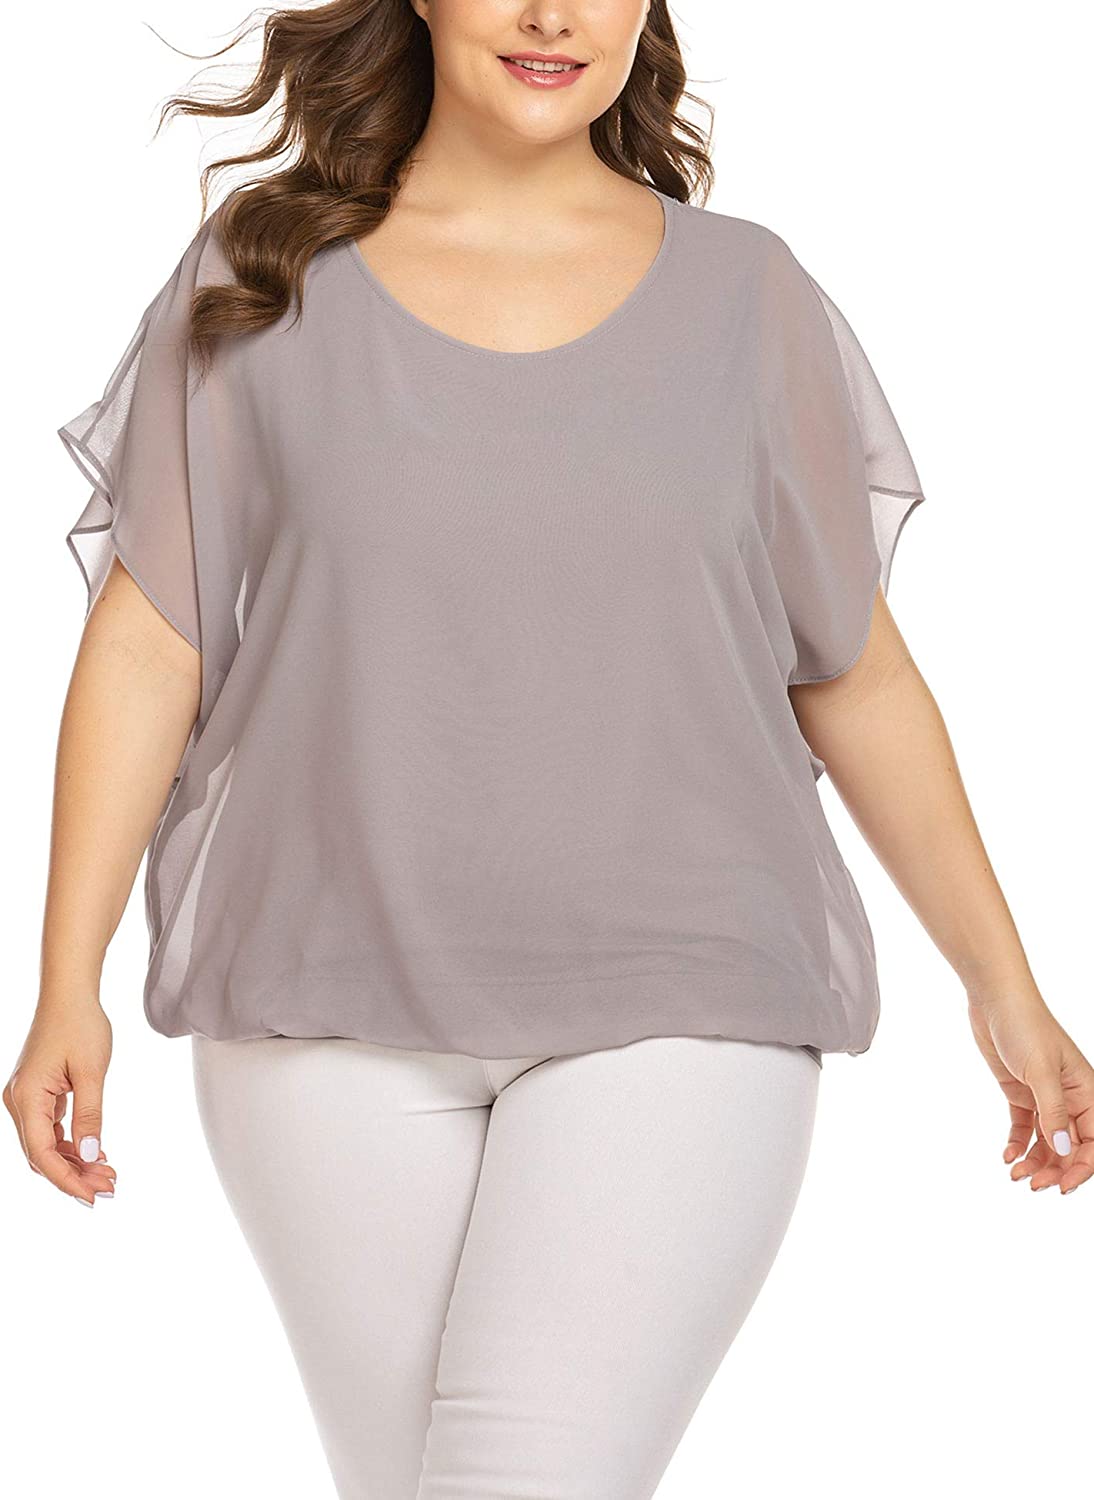 IN'VOLAND Plus Size Women Chiffon Blouse Batwing Sleeve Tops Scoop Neck  Tunic Sh